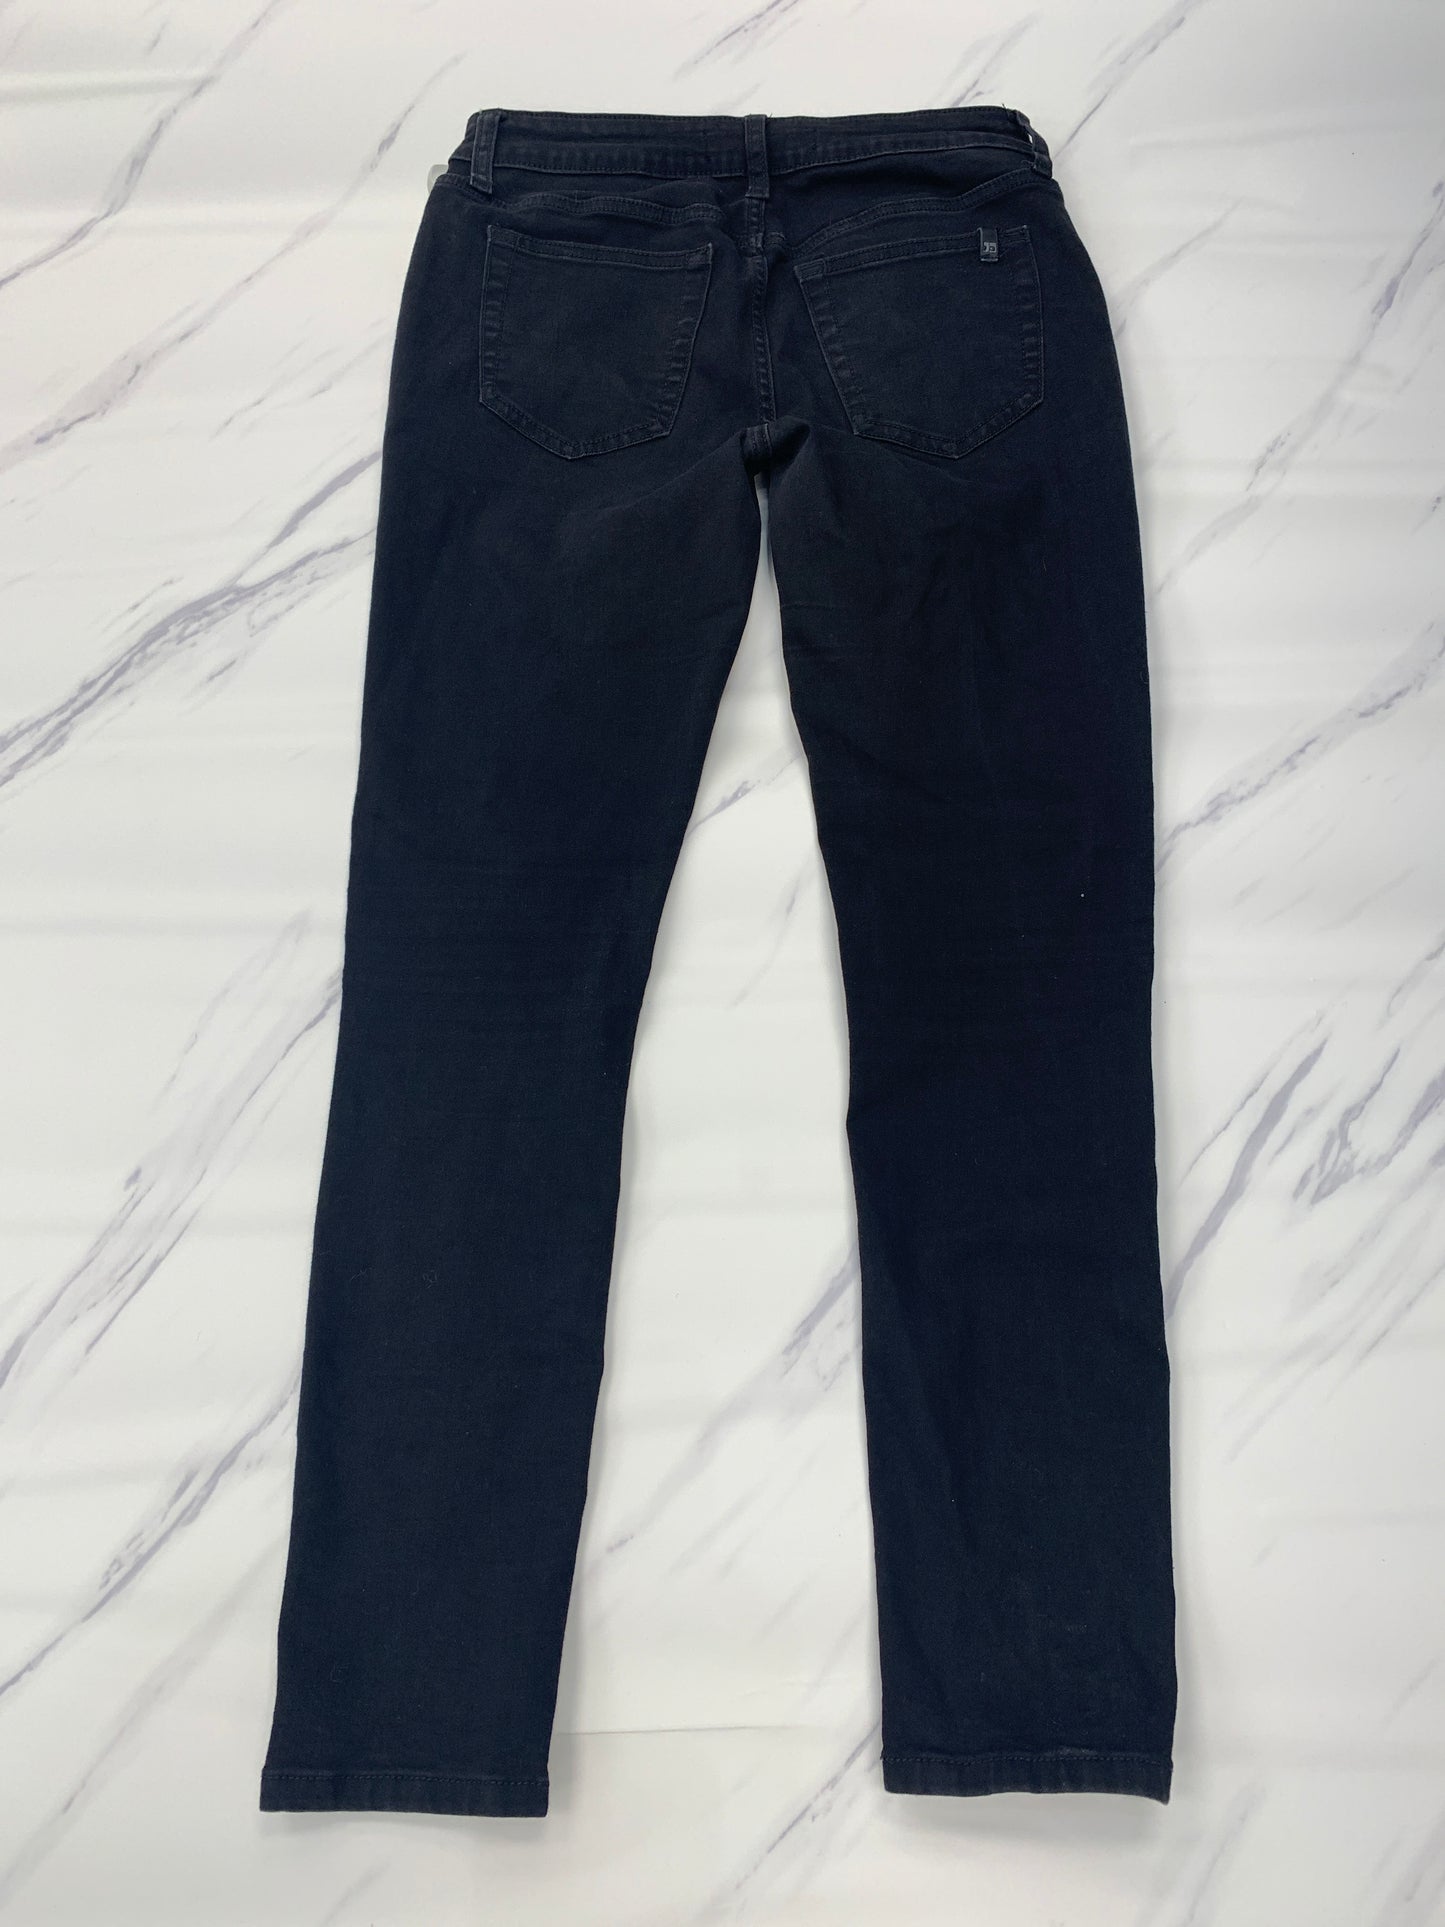 Jeans Skinny By Joes Jeans  Size: 6